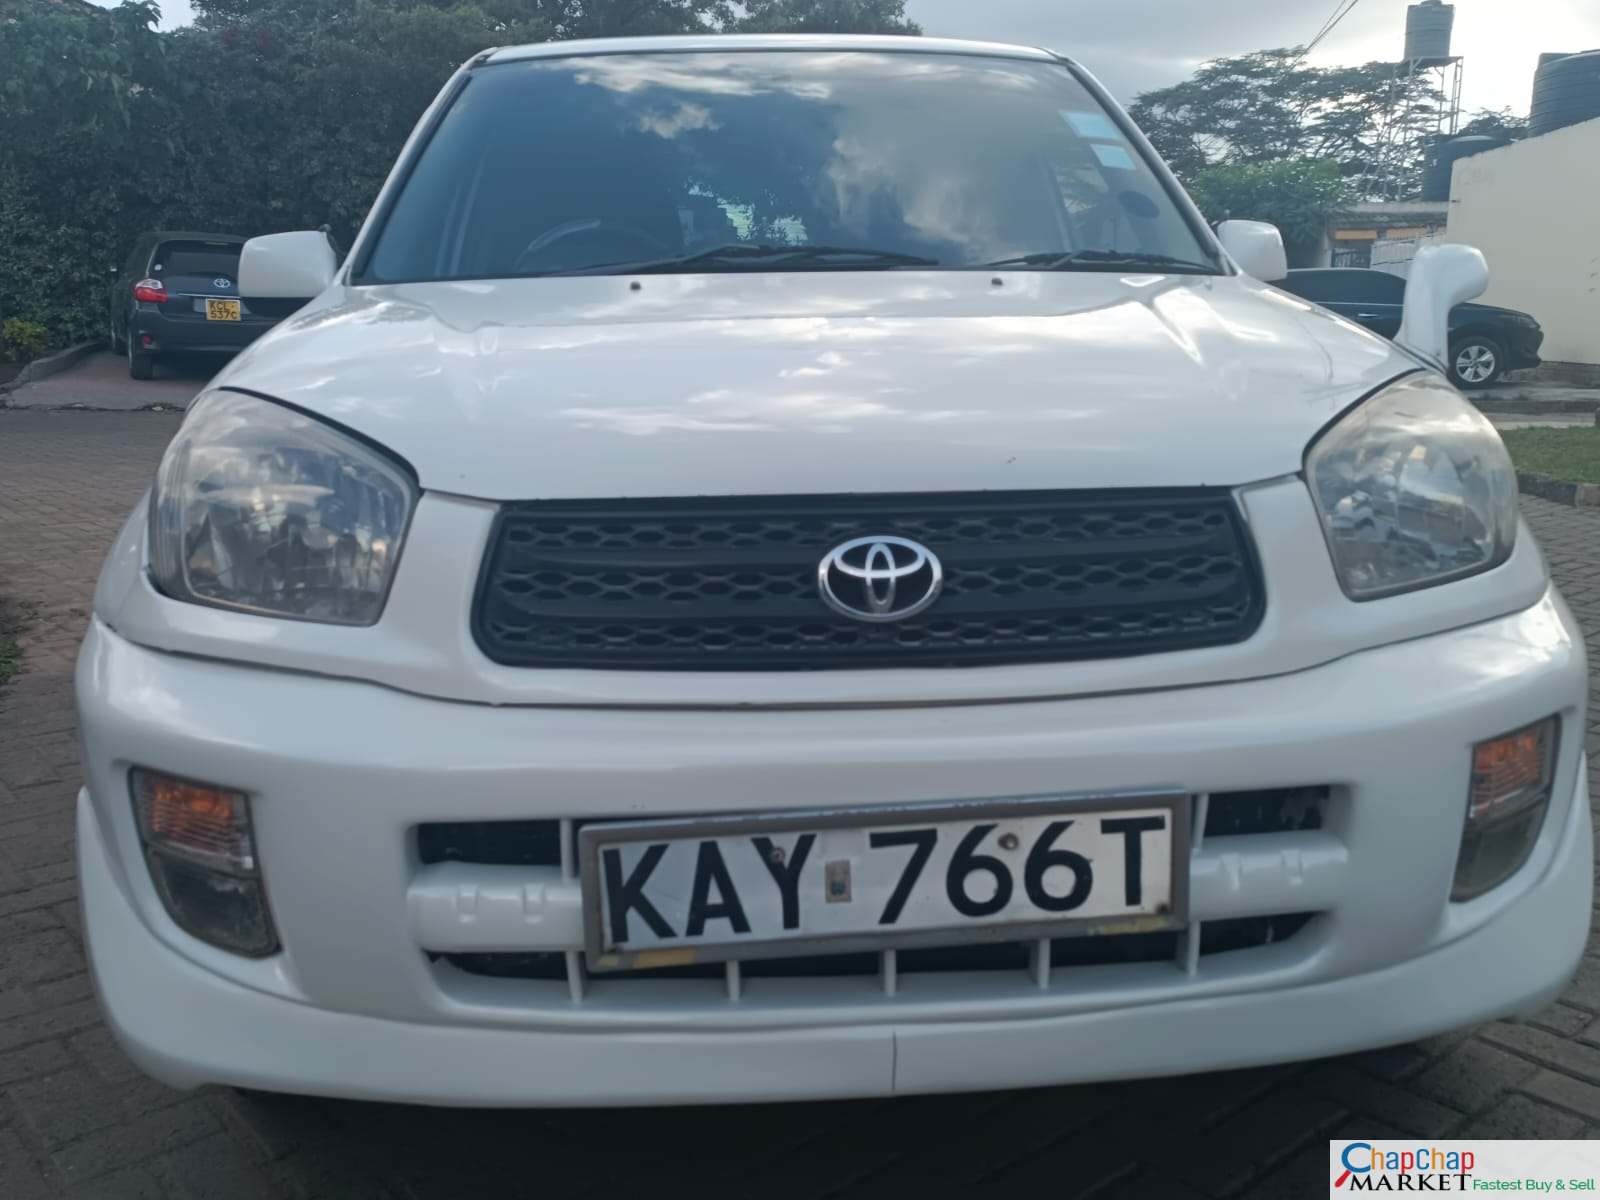 Toyota RAV4 1800cc QUICKEST SALE You Pay 30% Deposit Trade in OK Wow!